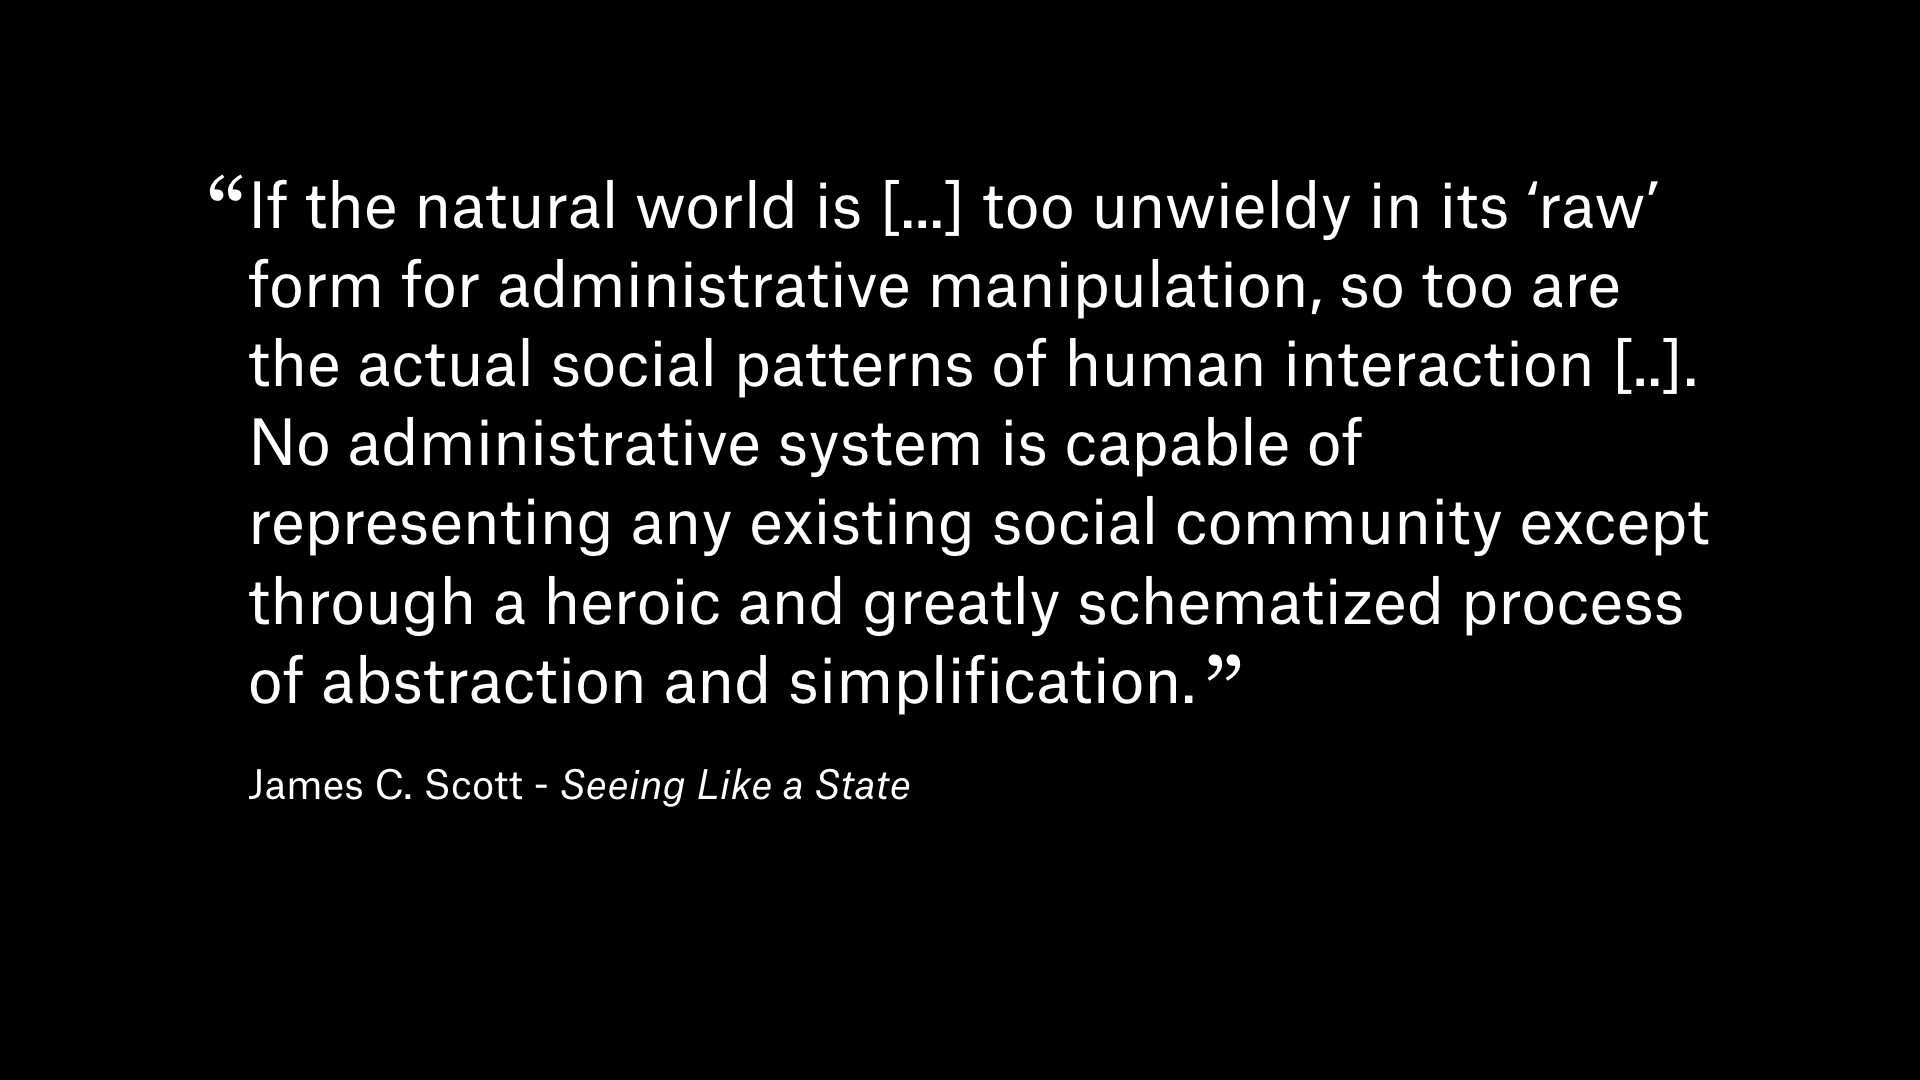 Quote by James C. Scott from 'Seeing Like a State': If the natural world is [...] too unwieldy in its 'raw' form for administrative manipulation, so too are the actual social patterns of human interaction [..]. No administrative system is capable of representing any existing social community except through a heroic and greatly schematized process of abstraction and simplification.